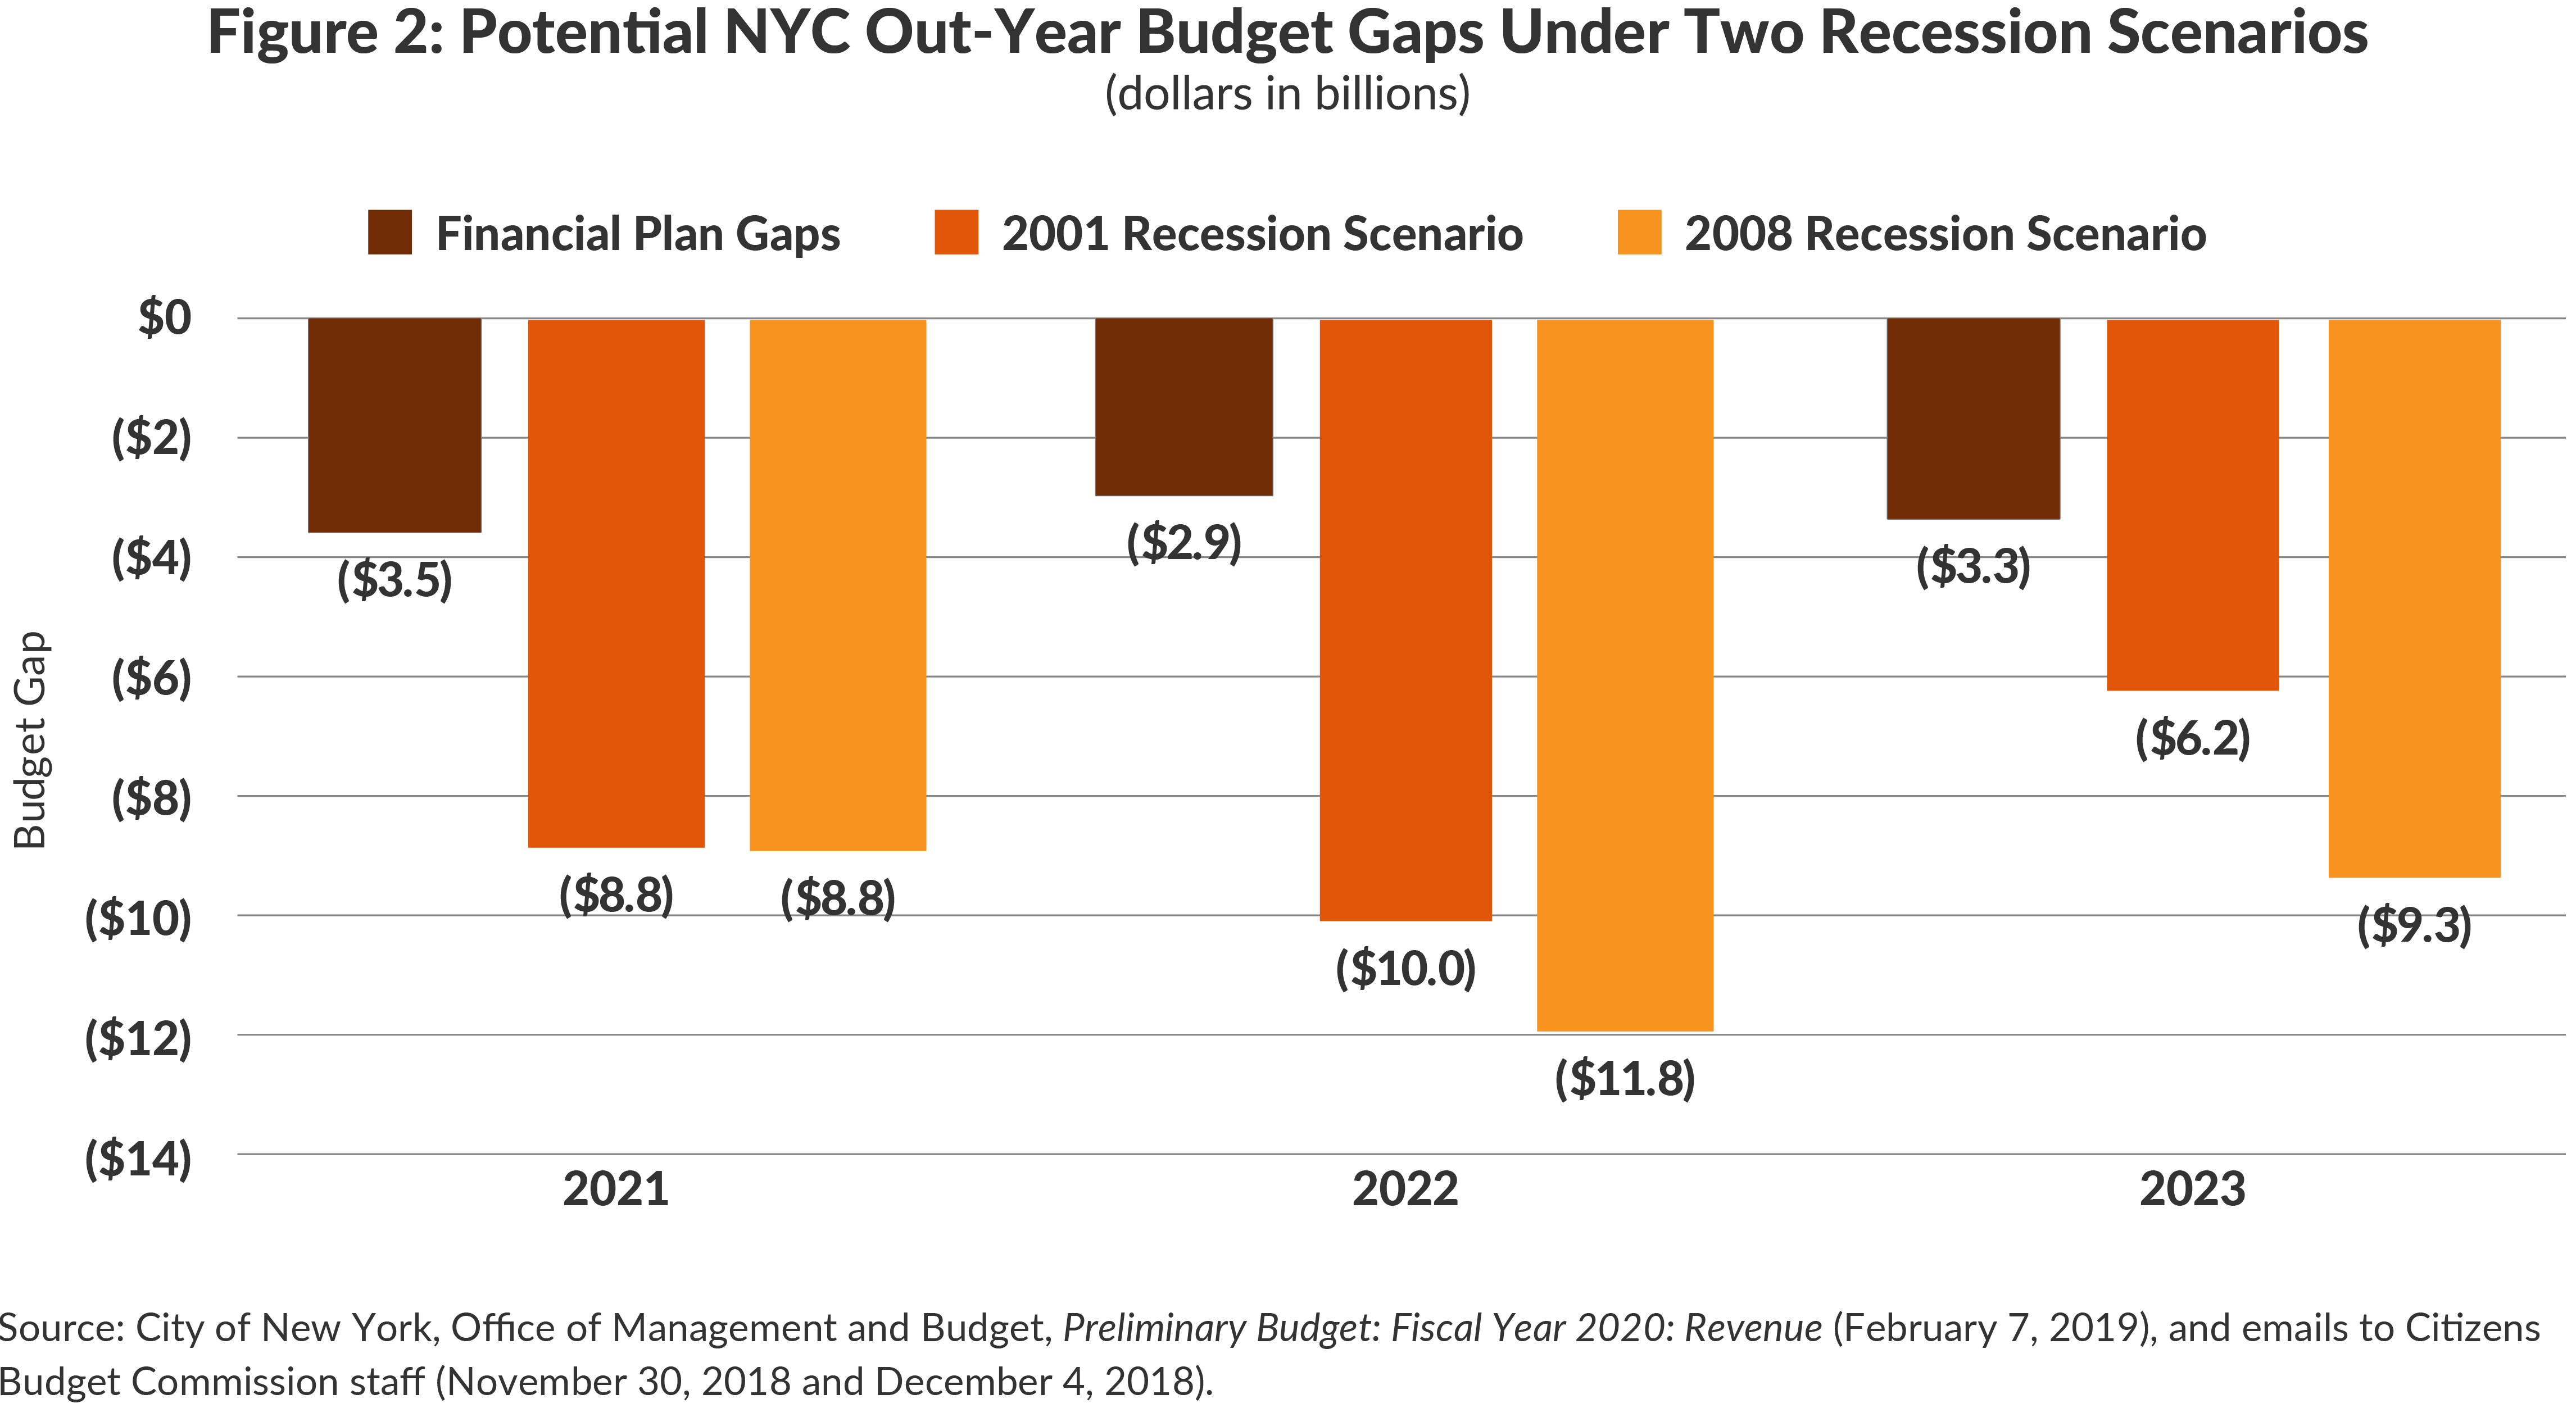 Figure 2: Potential NYC Out-Year Budget Gaps Under Two Recession Scenarios